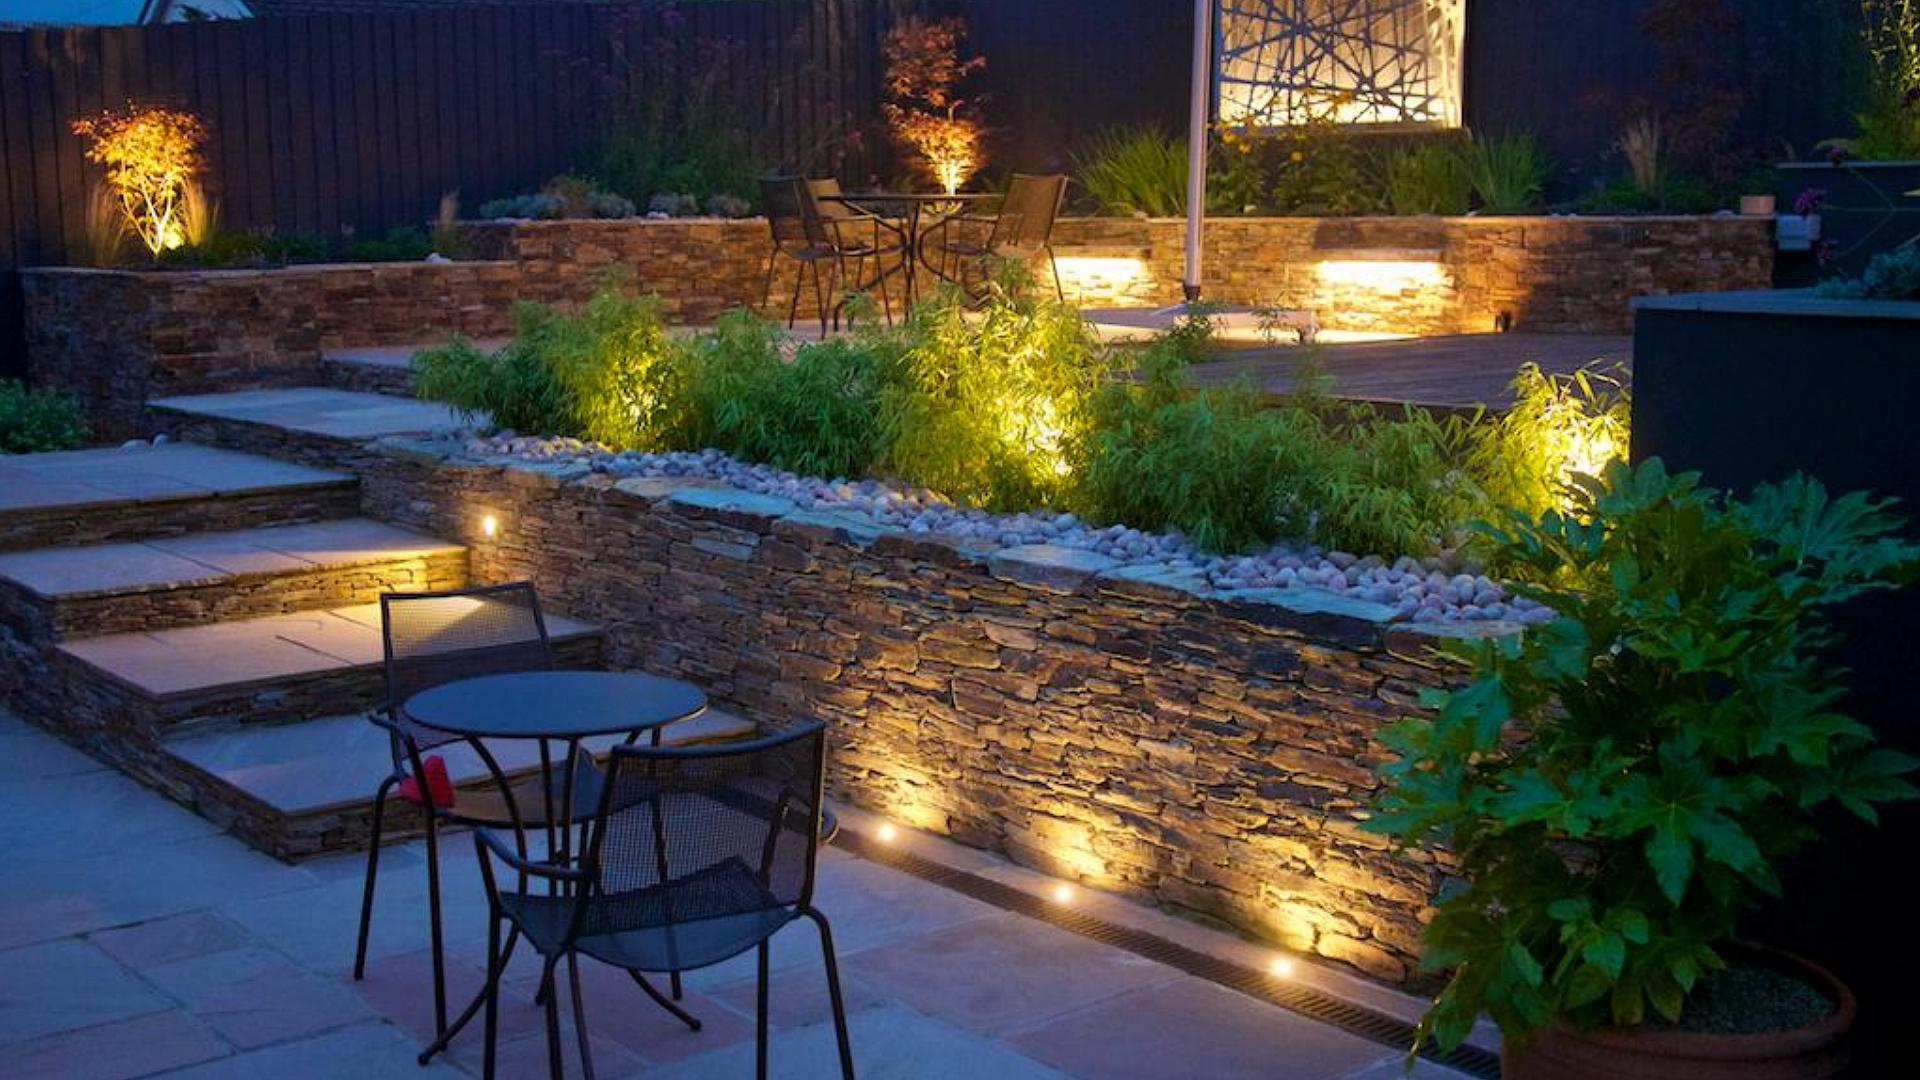 Alison Bockh Garden Design - Adjustable lighting makes it all useable and safe at night.